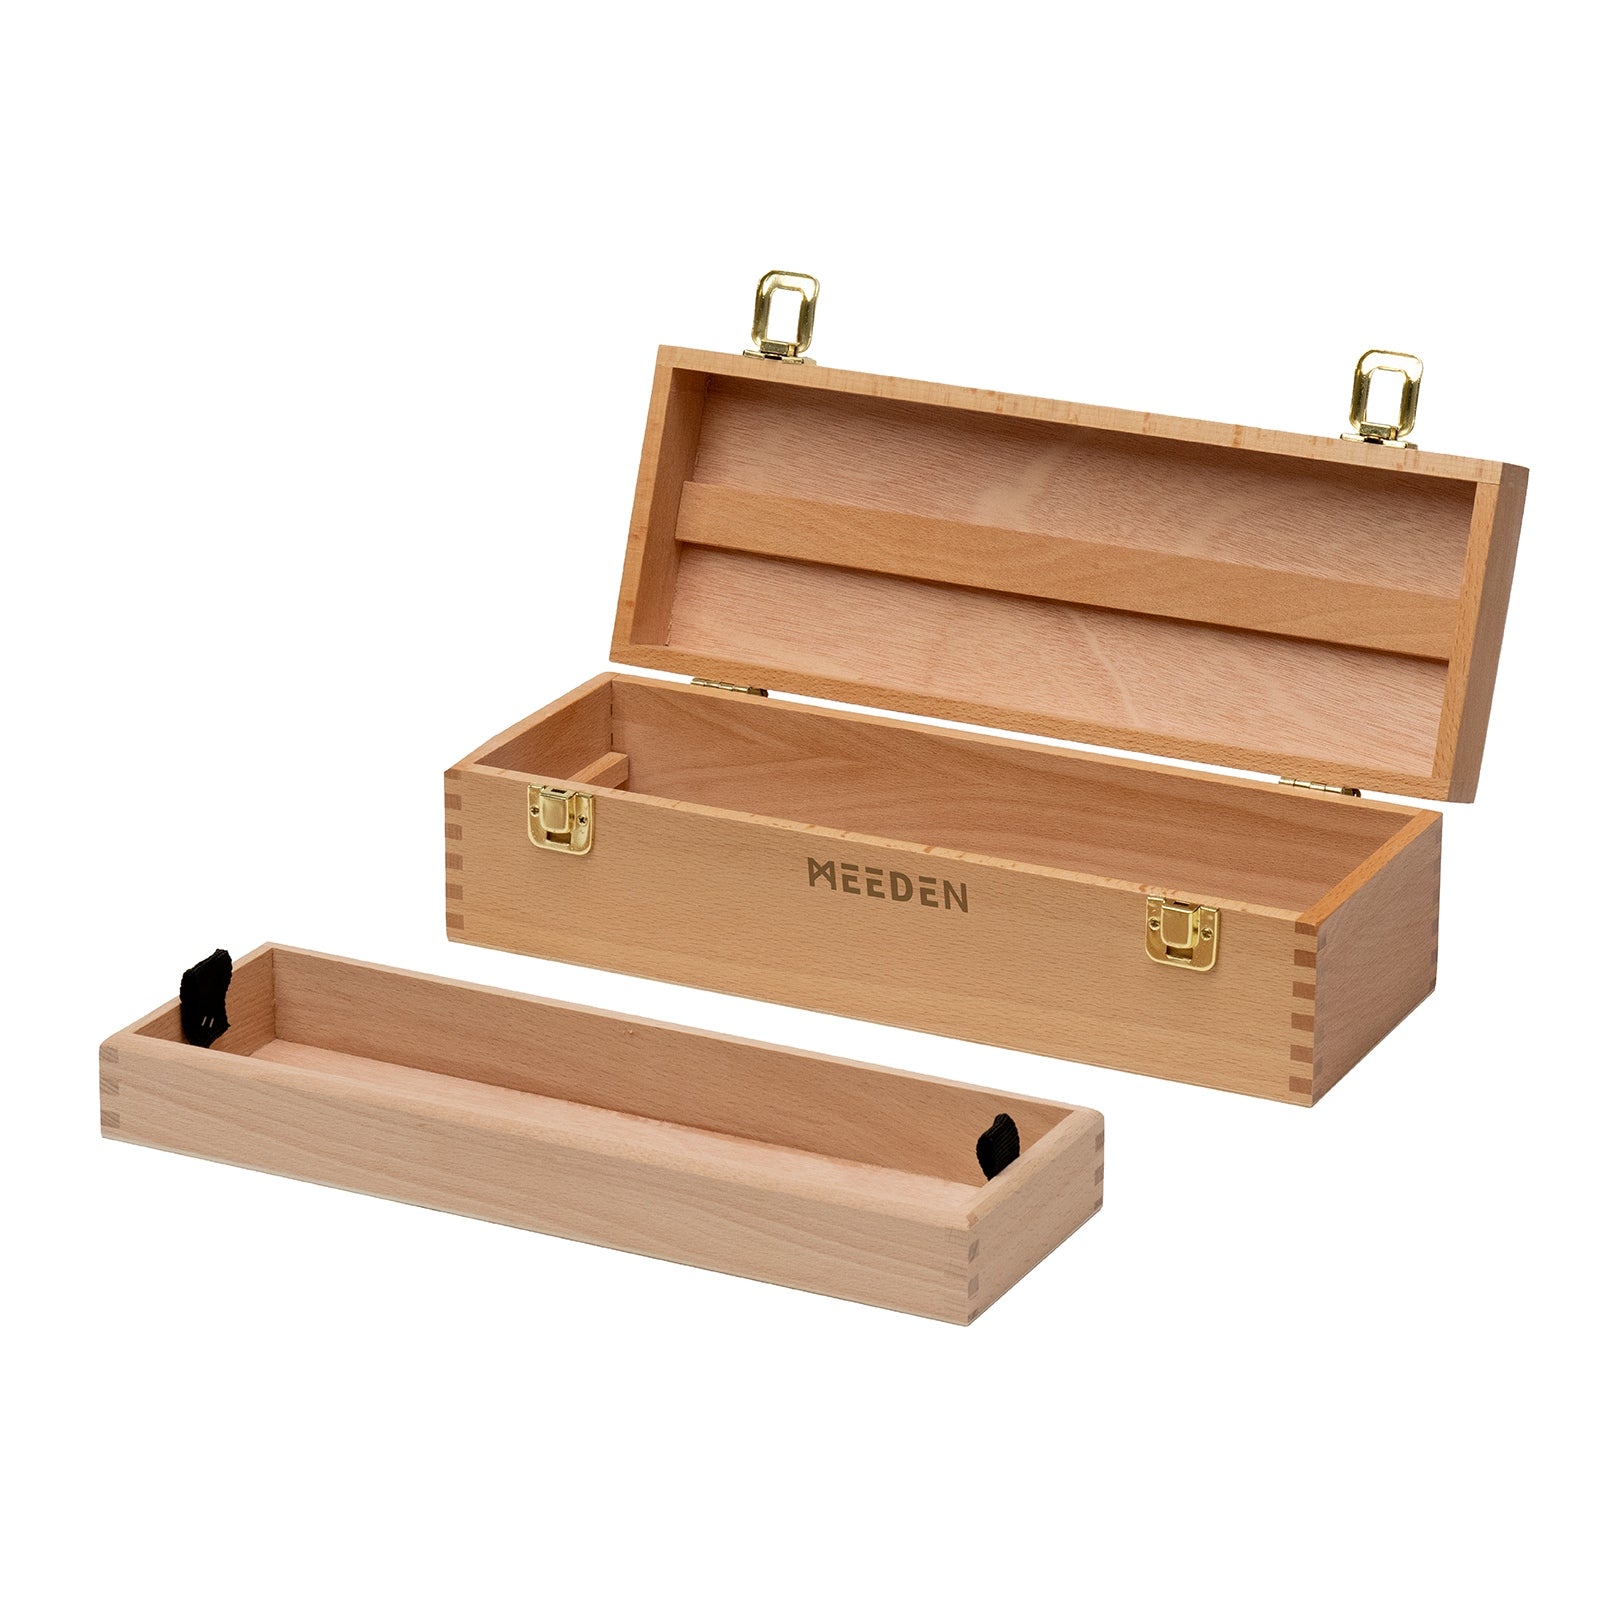 Medium Multi-Function Storage Box with Lift Out Trays